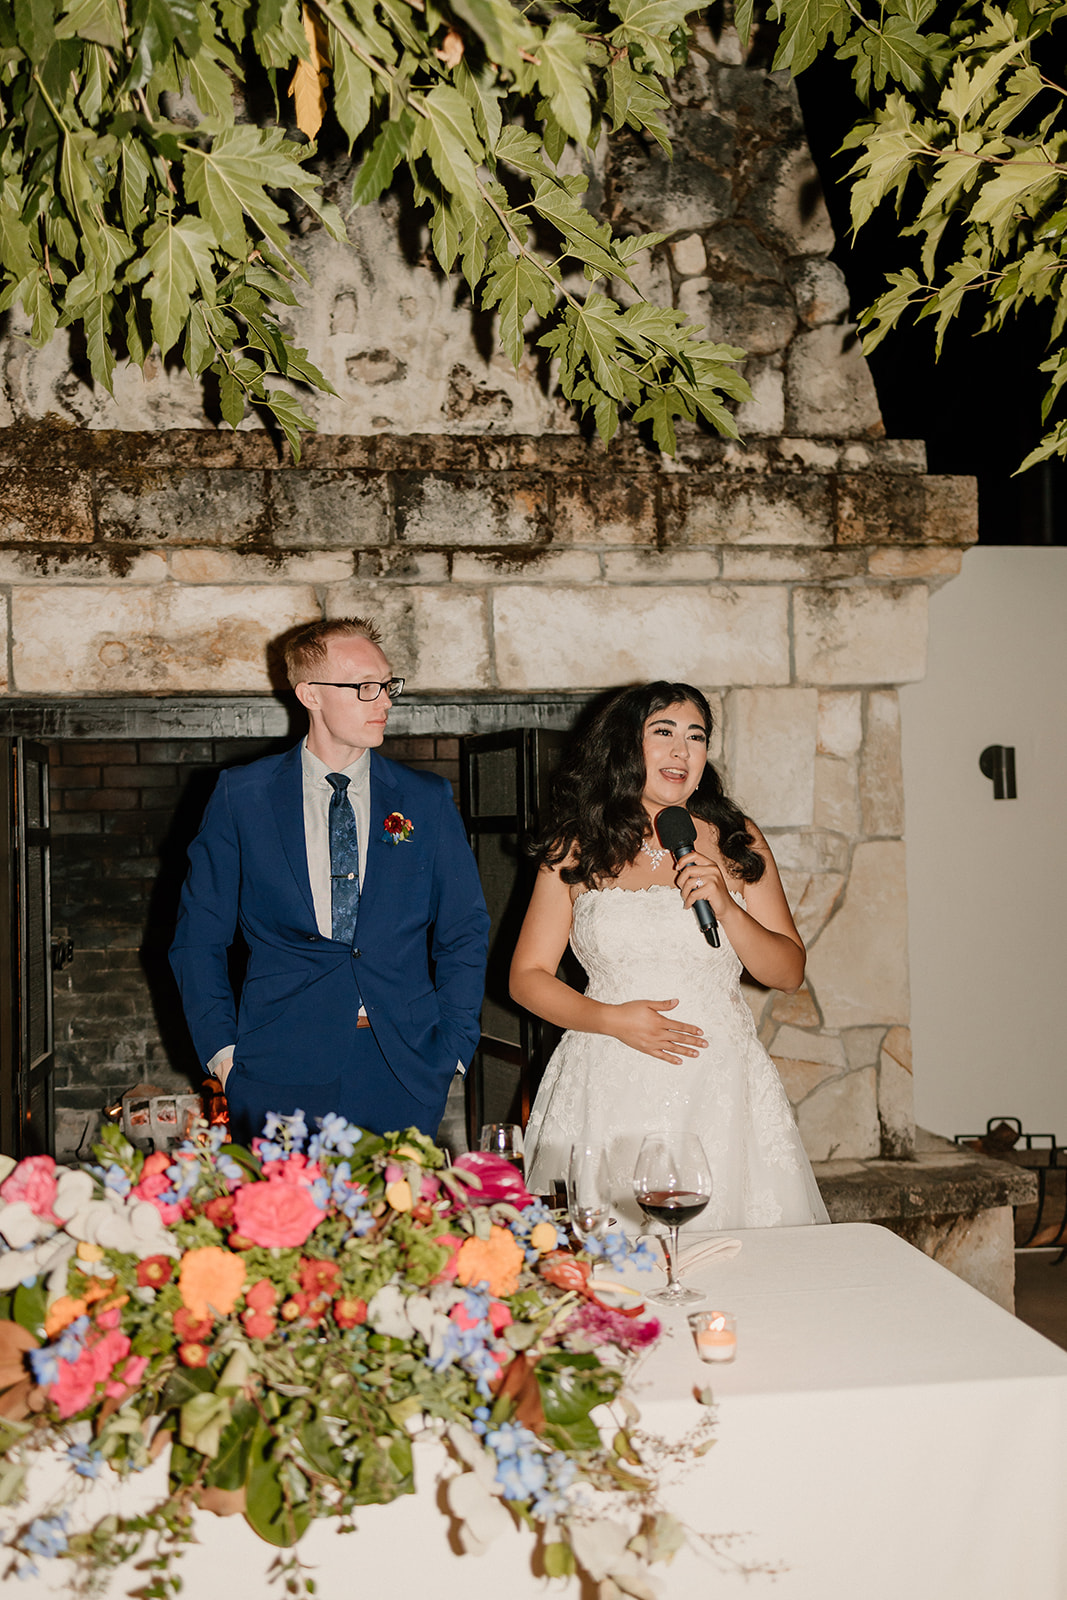 A bride and groom kissing at a banquet table with colorful floral arrangements, in front of a stone fireplace.